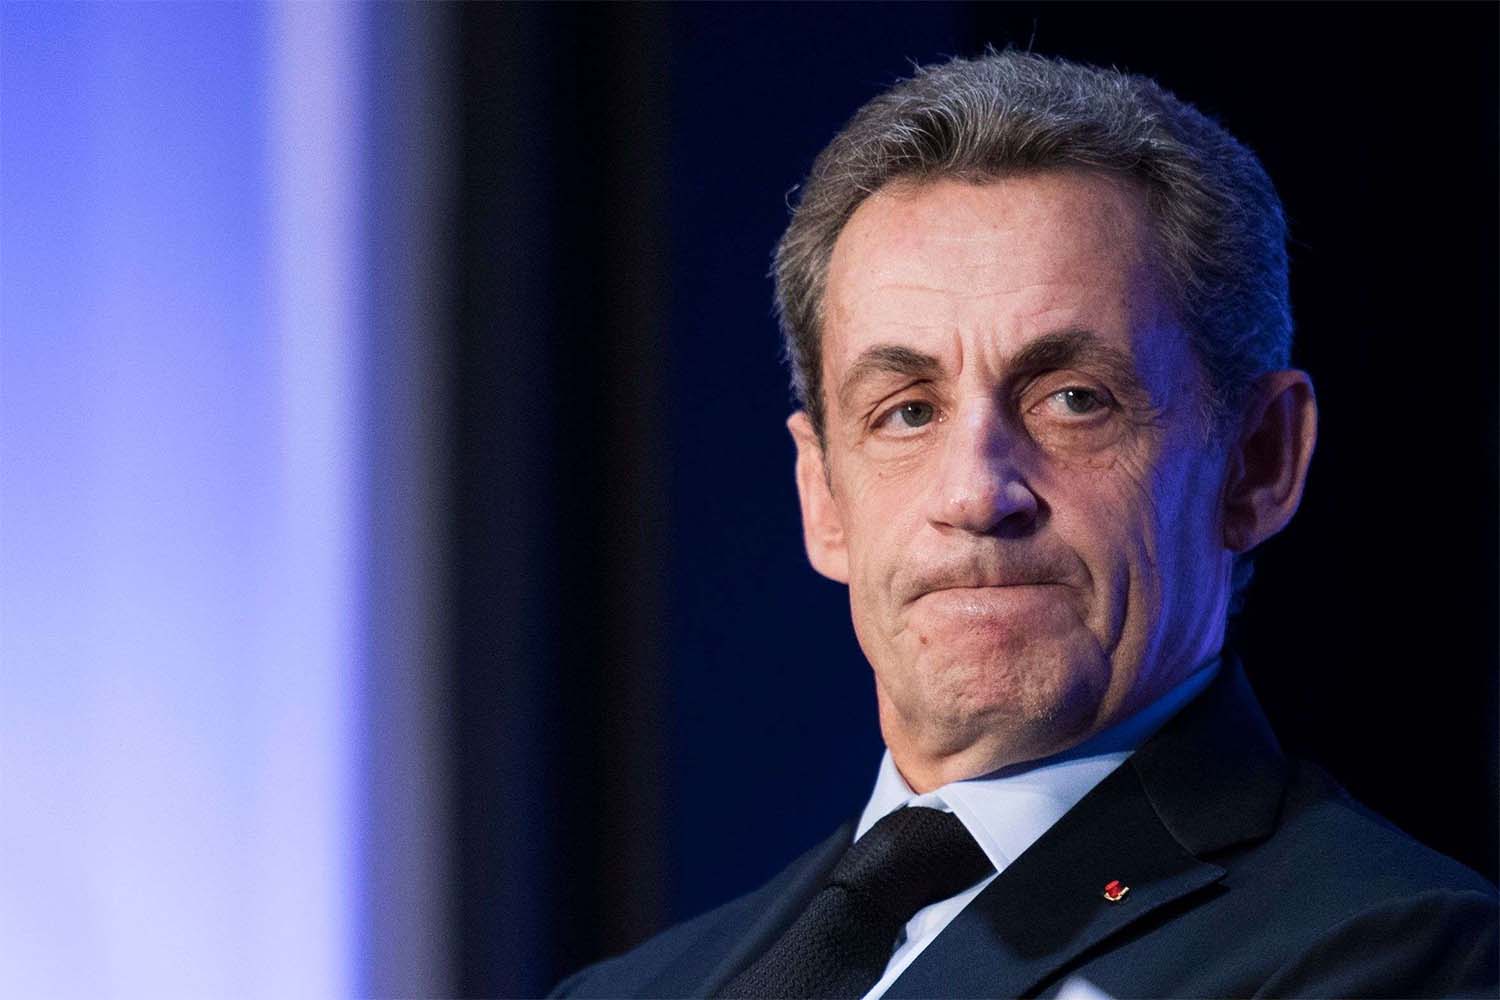 Sarkozy claims he's victim of a "plot" in this case